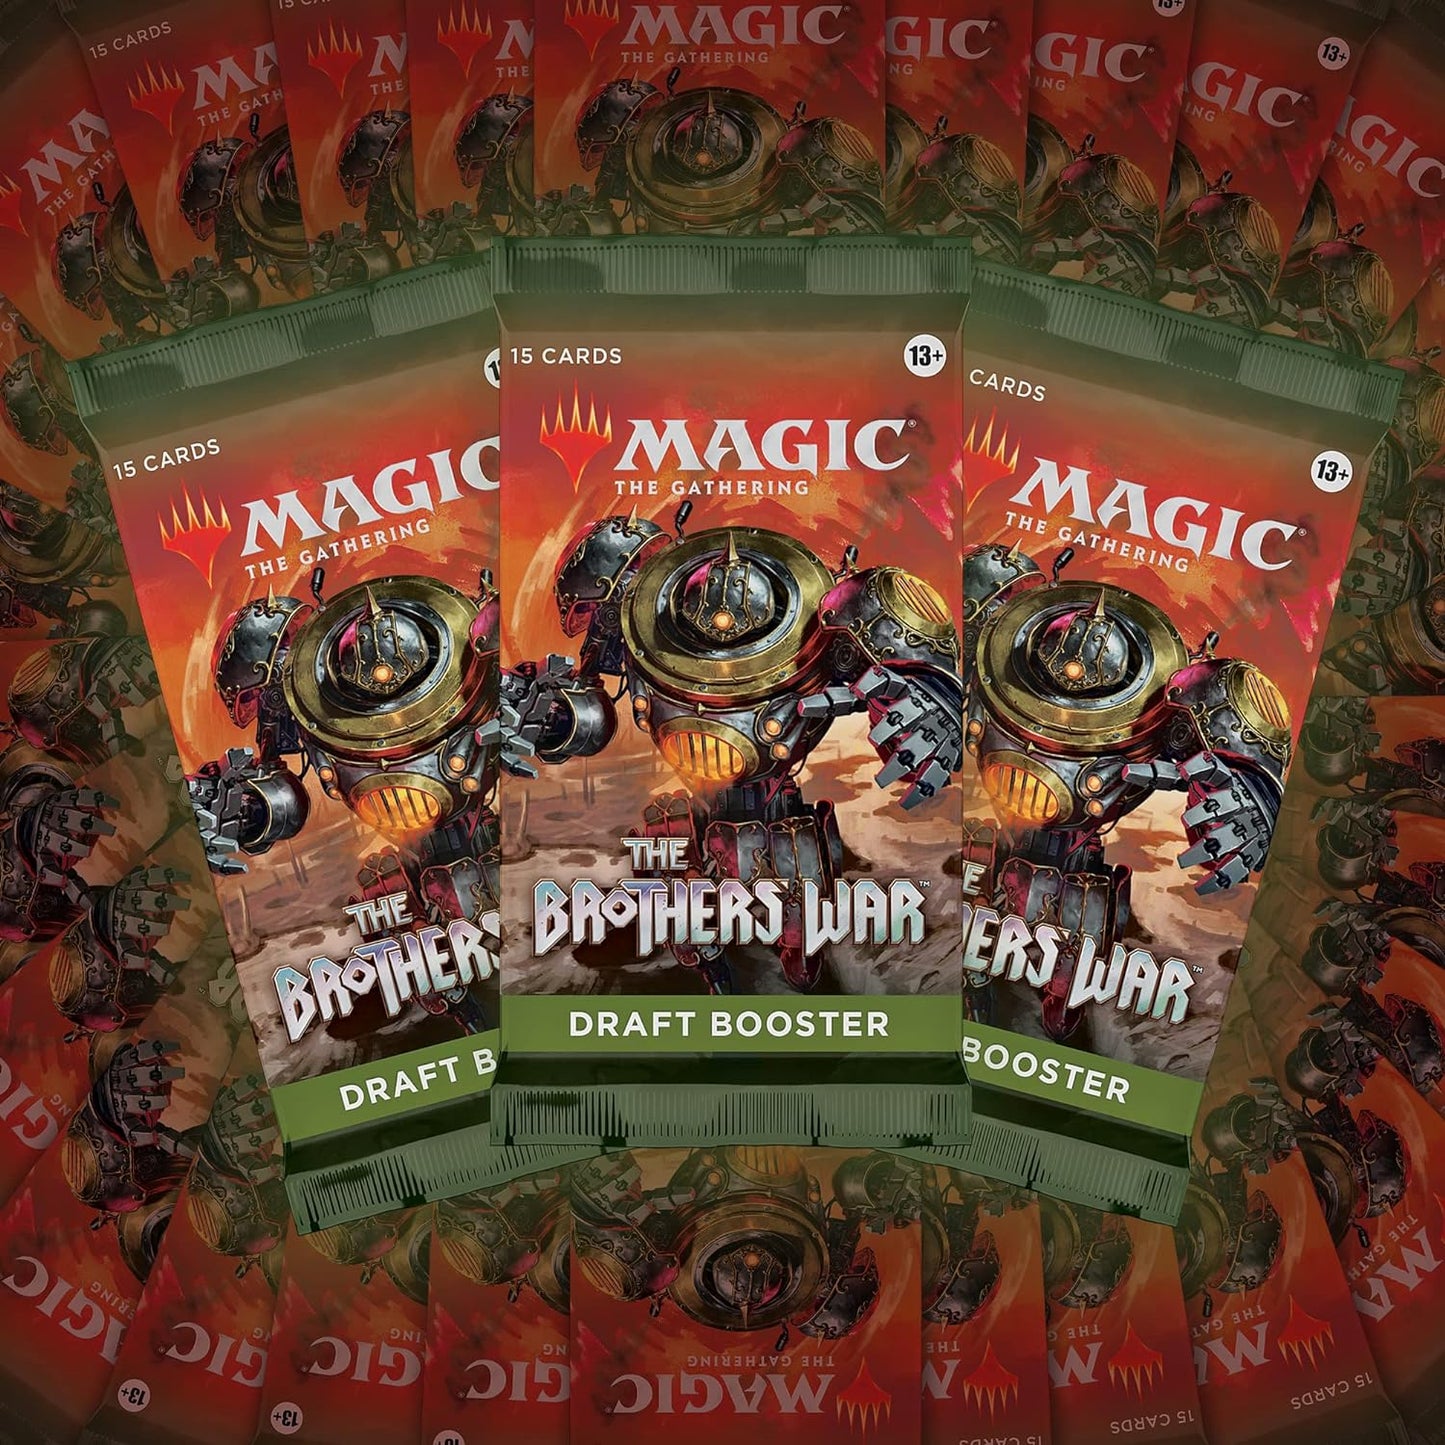 The Brothers’ War Draft Booster Pack - Magic The Gathering